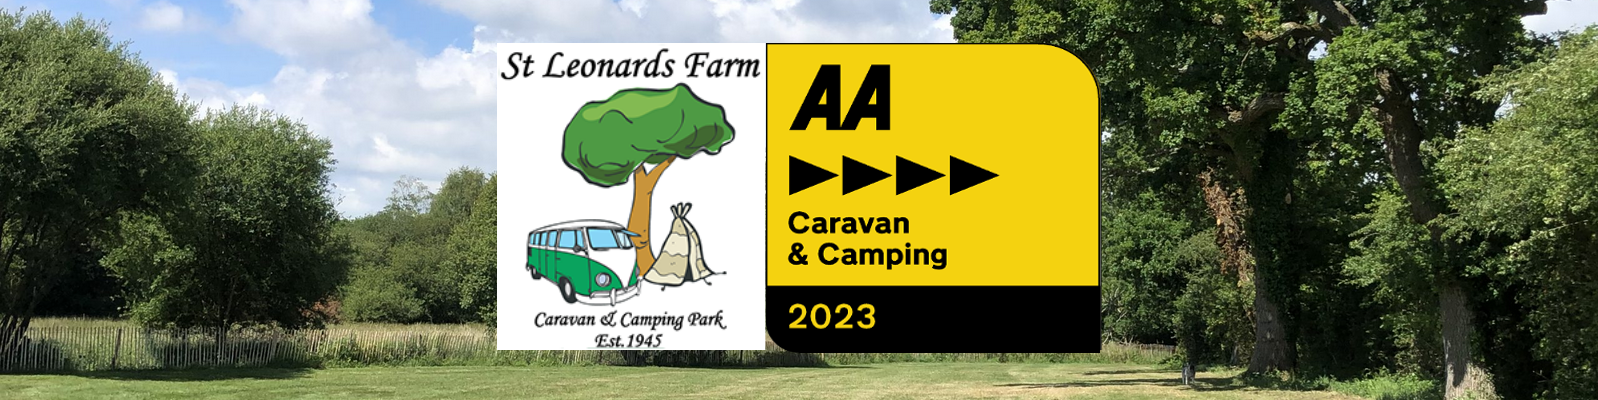 Campsites Bournemouth Camping, Bournemouth Campsites, Dorset Camping, Dorset Campsite,